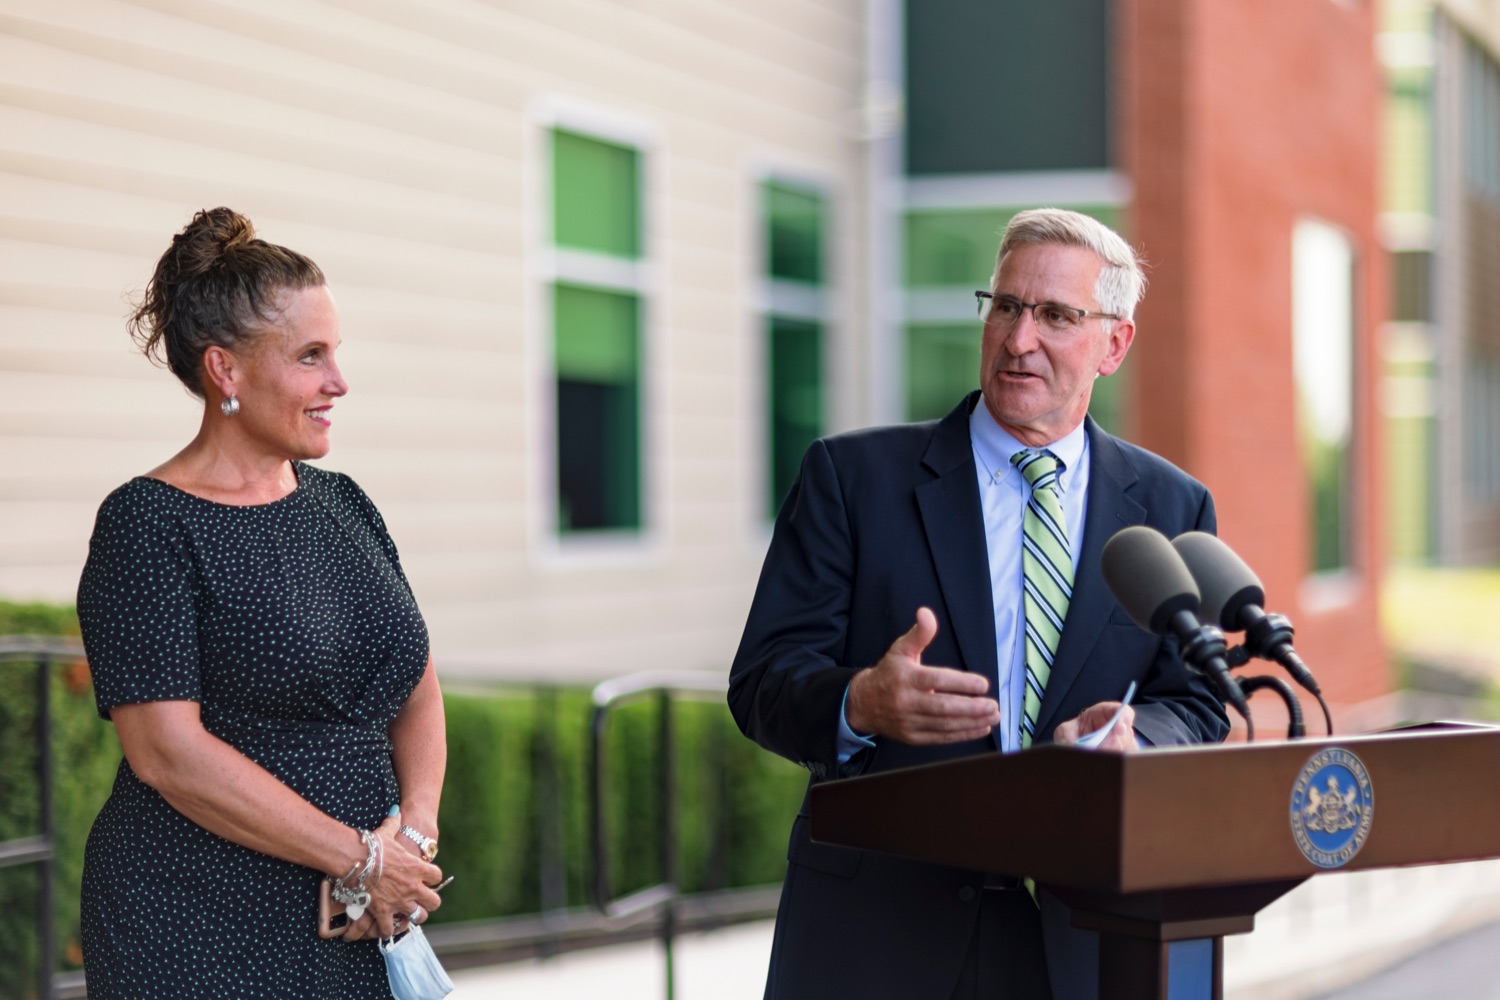 PA Dept. of Agriculture Secretary Russell Redding speaks during a press conference, which highlighted the success of Pennsylvania's farm to school programs, at Hill Top Academy in Mechanicsburg on Friday, August 27, 2021.<br><a href="https://filesource.amperwave.net/commonwealthofpa/photo/19054_AGRIC_FarmToSchool_NK_010.jpg" target="_blank">⇣ Download Photo</a>